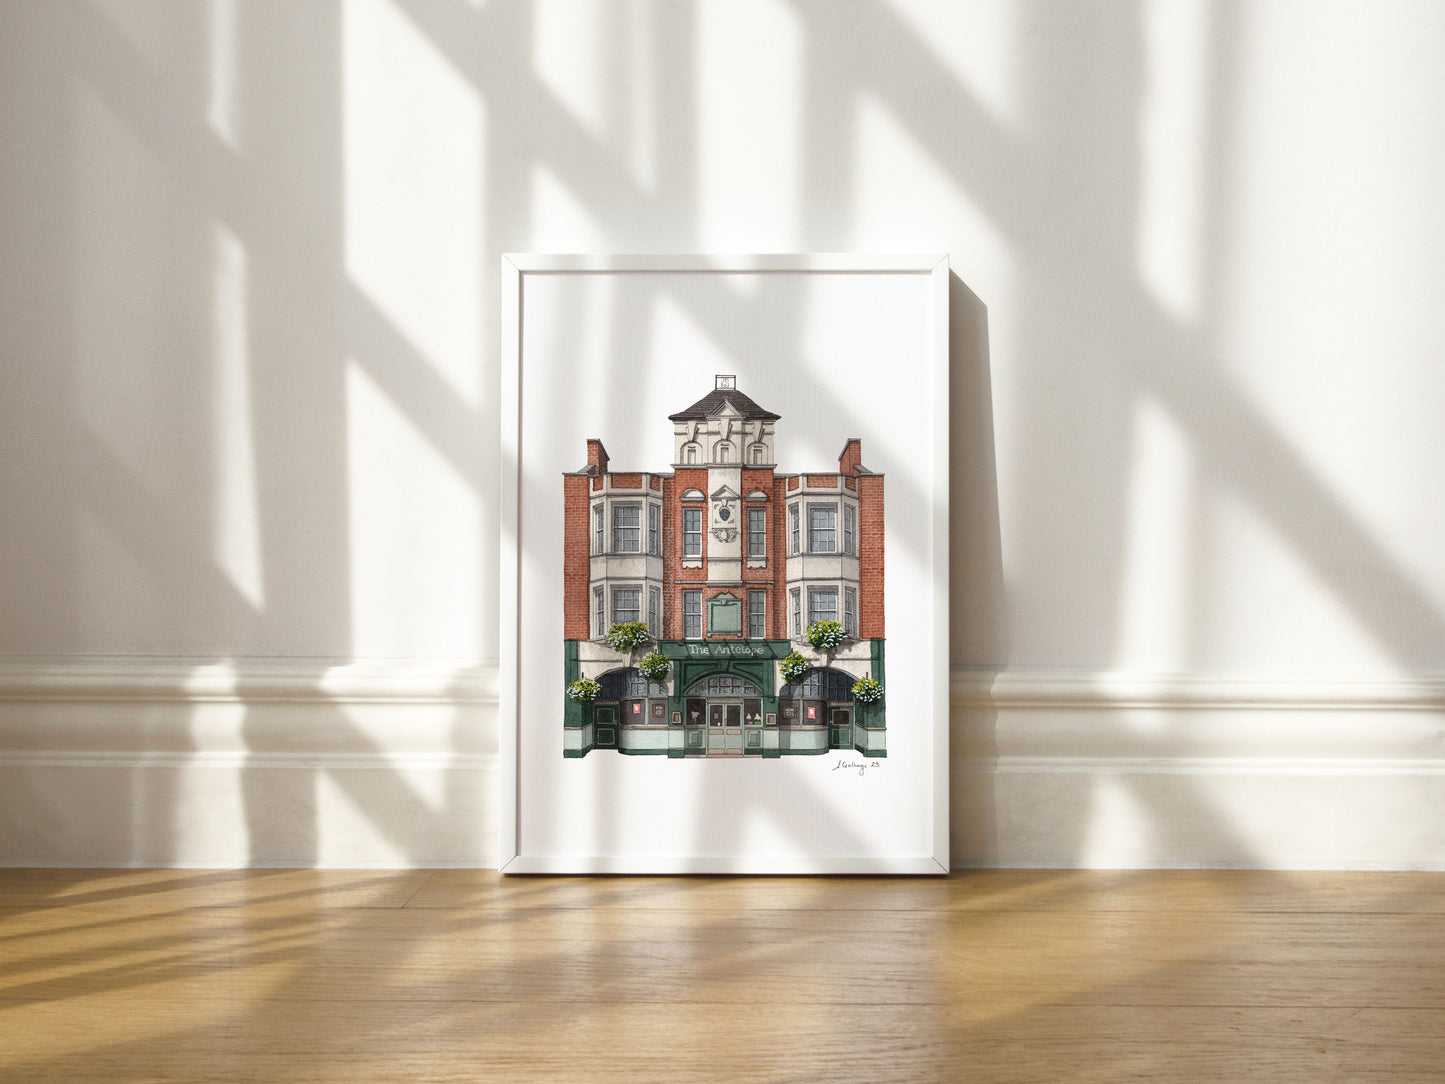 Tooting - The Antelope - Giclée Print (unframed)